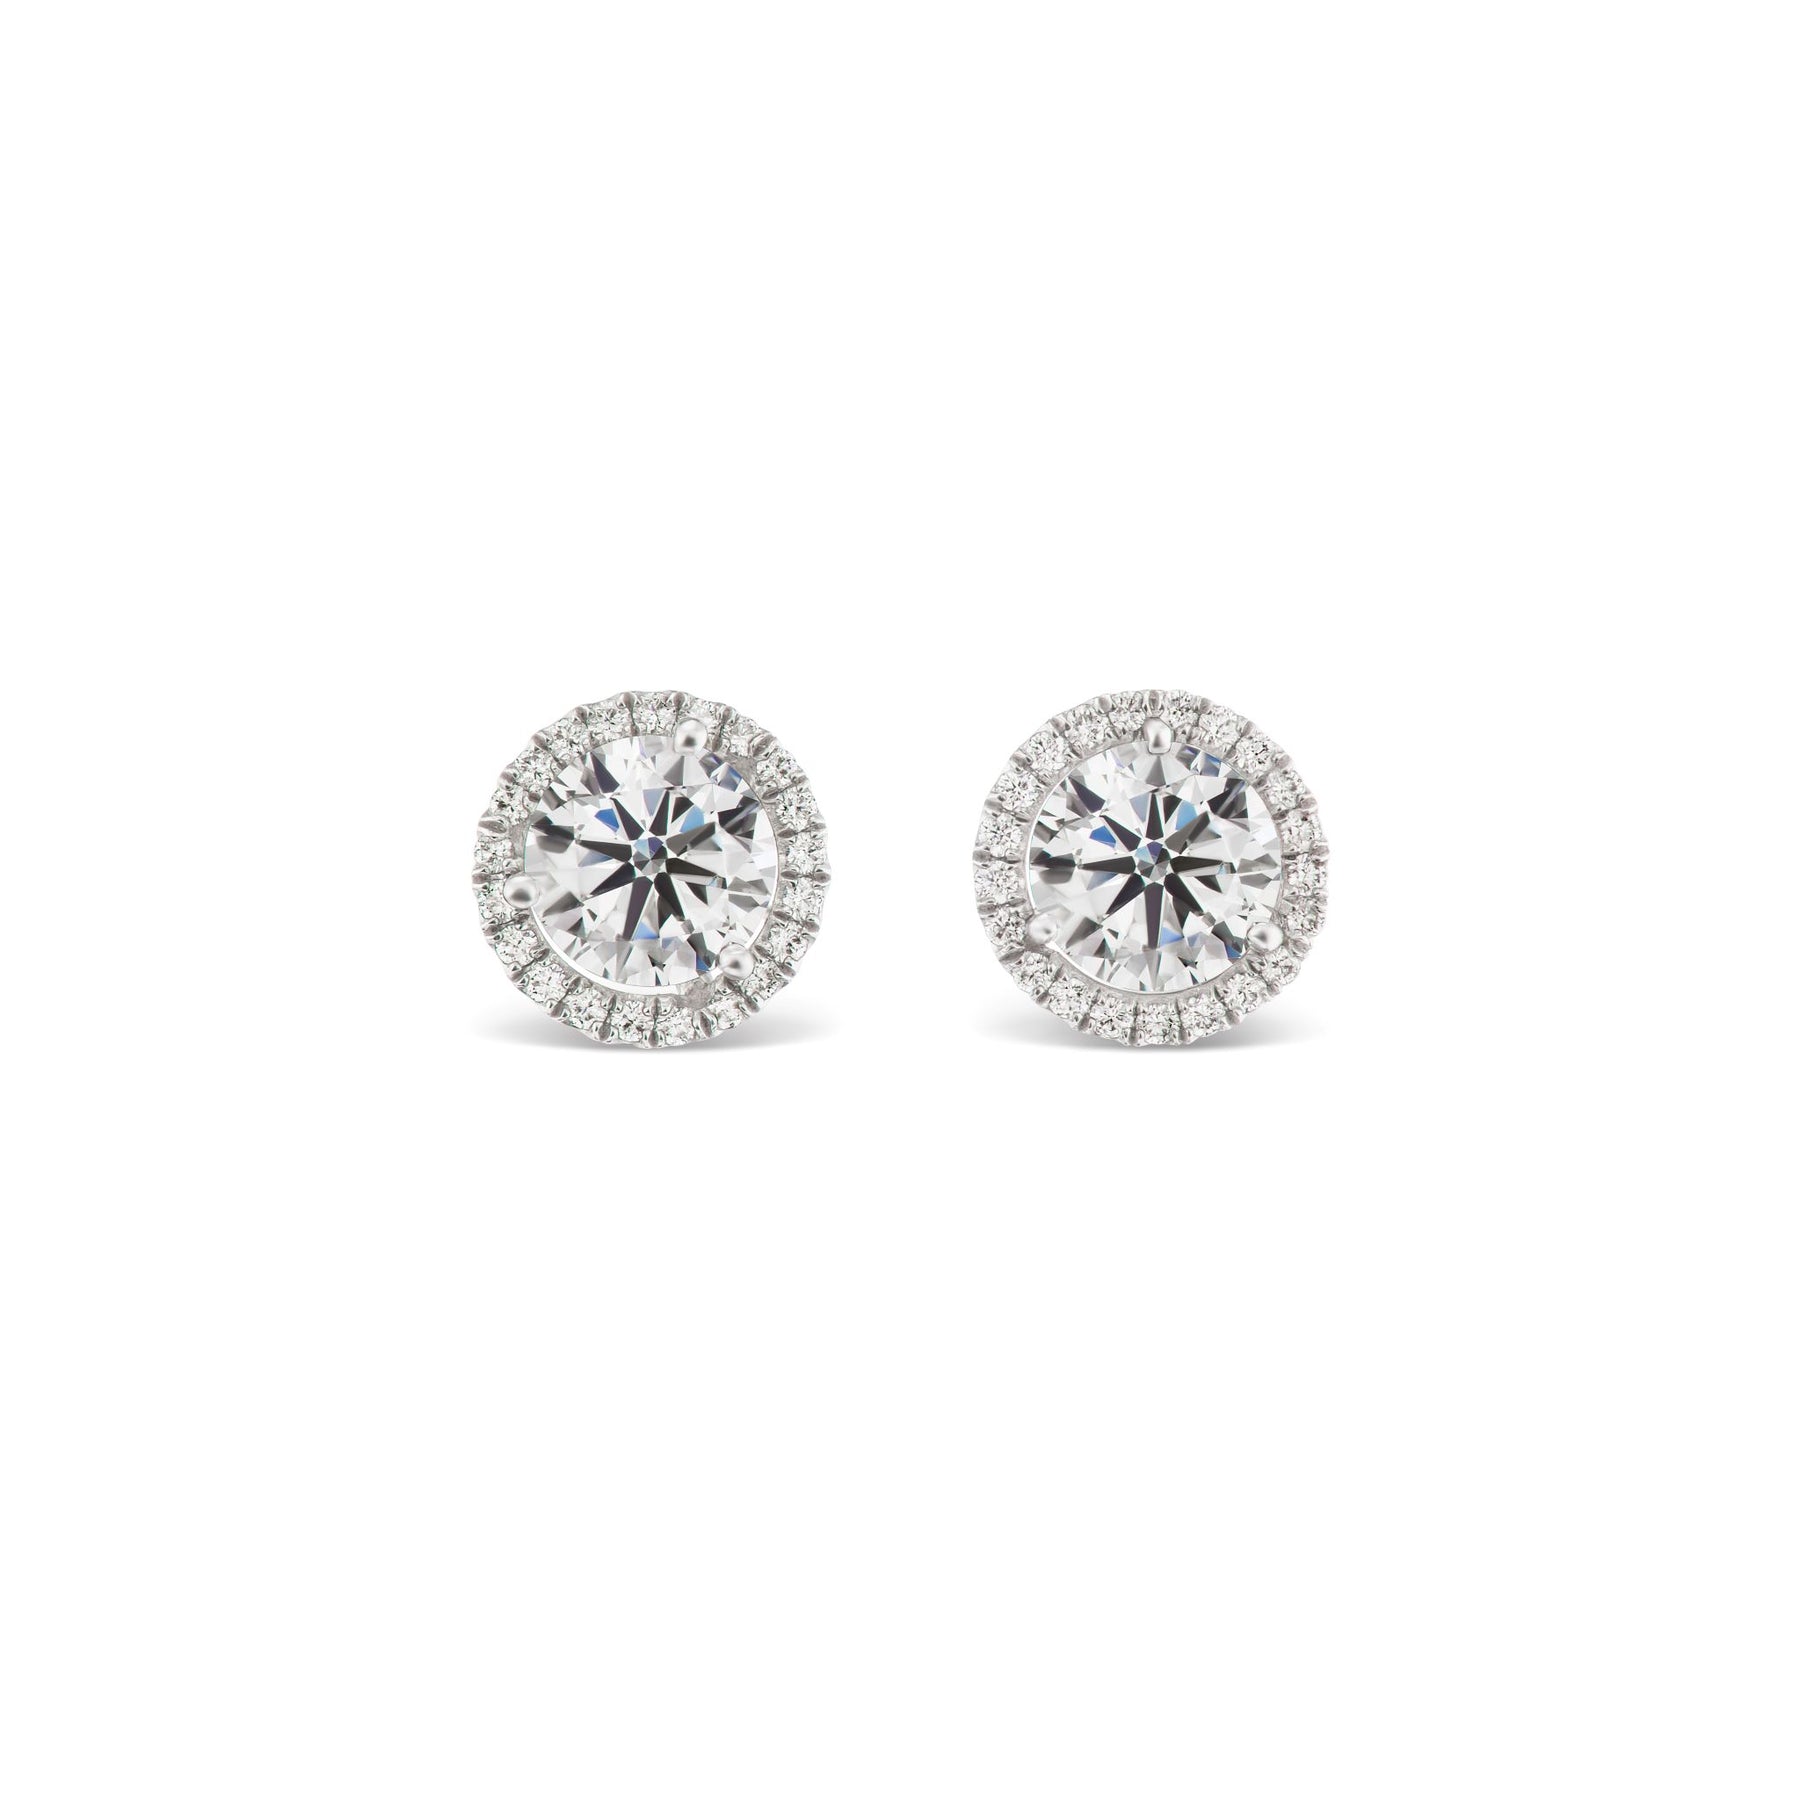 Pavé Halo Ear Jackets in Platinum with Round Brilliant Diamonds